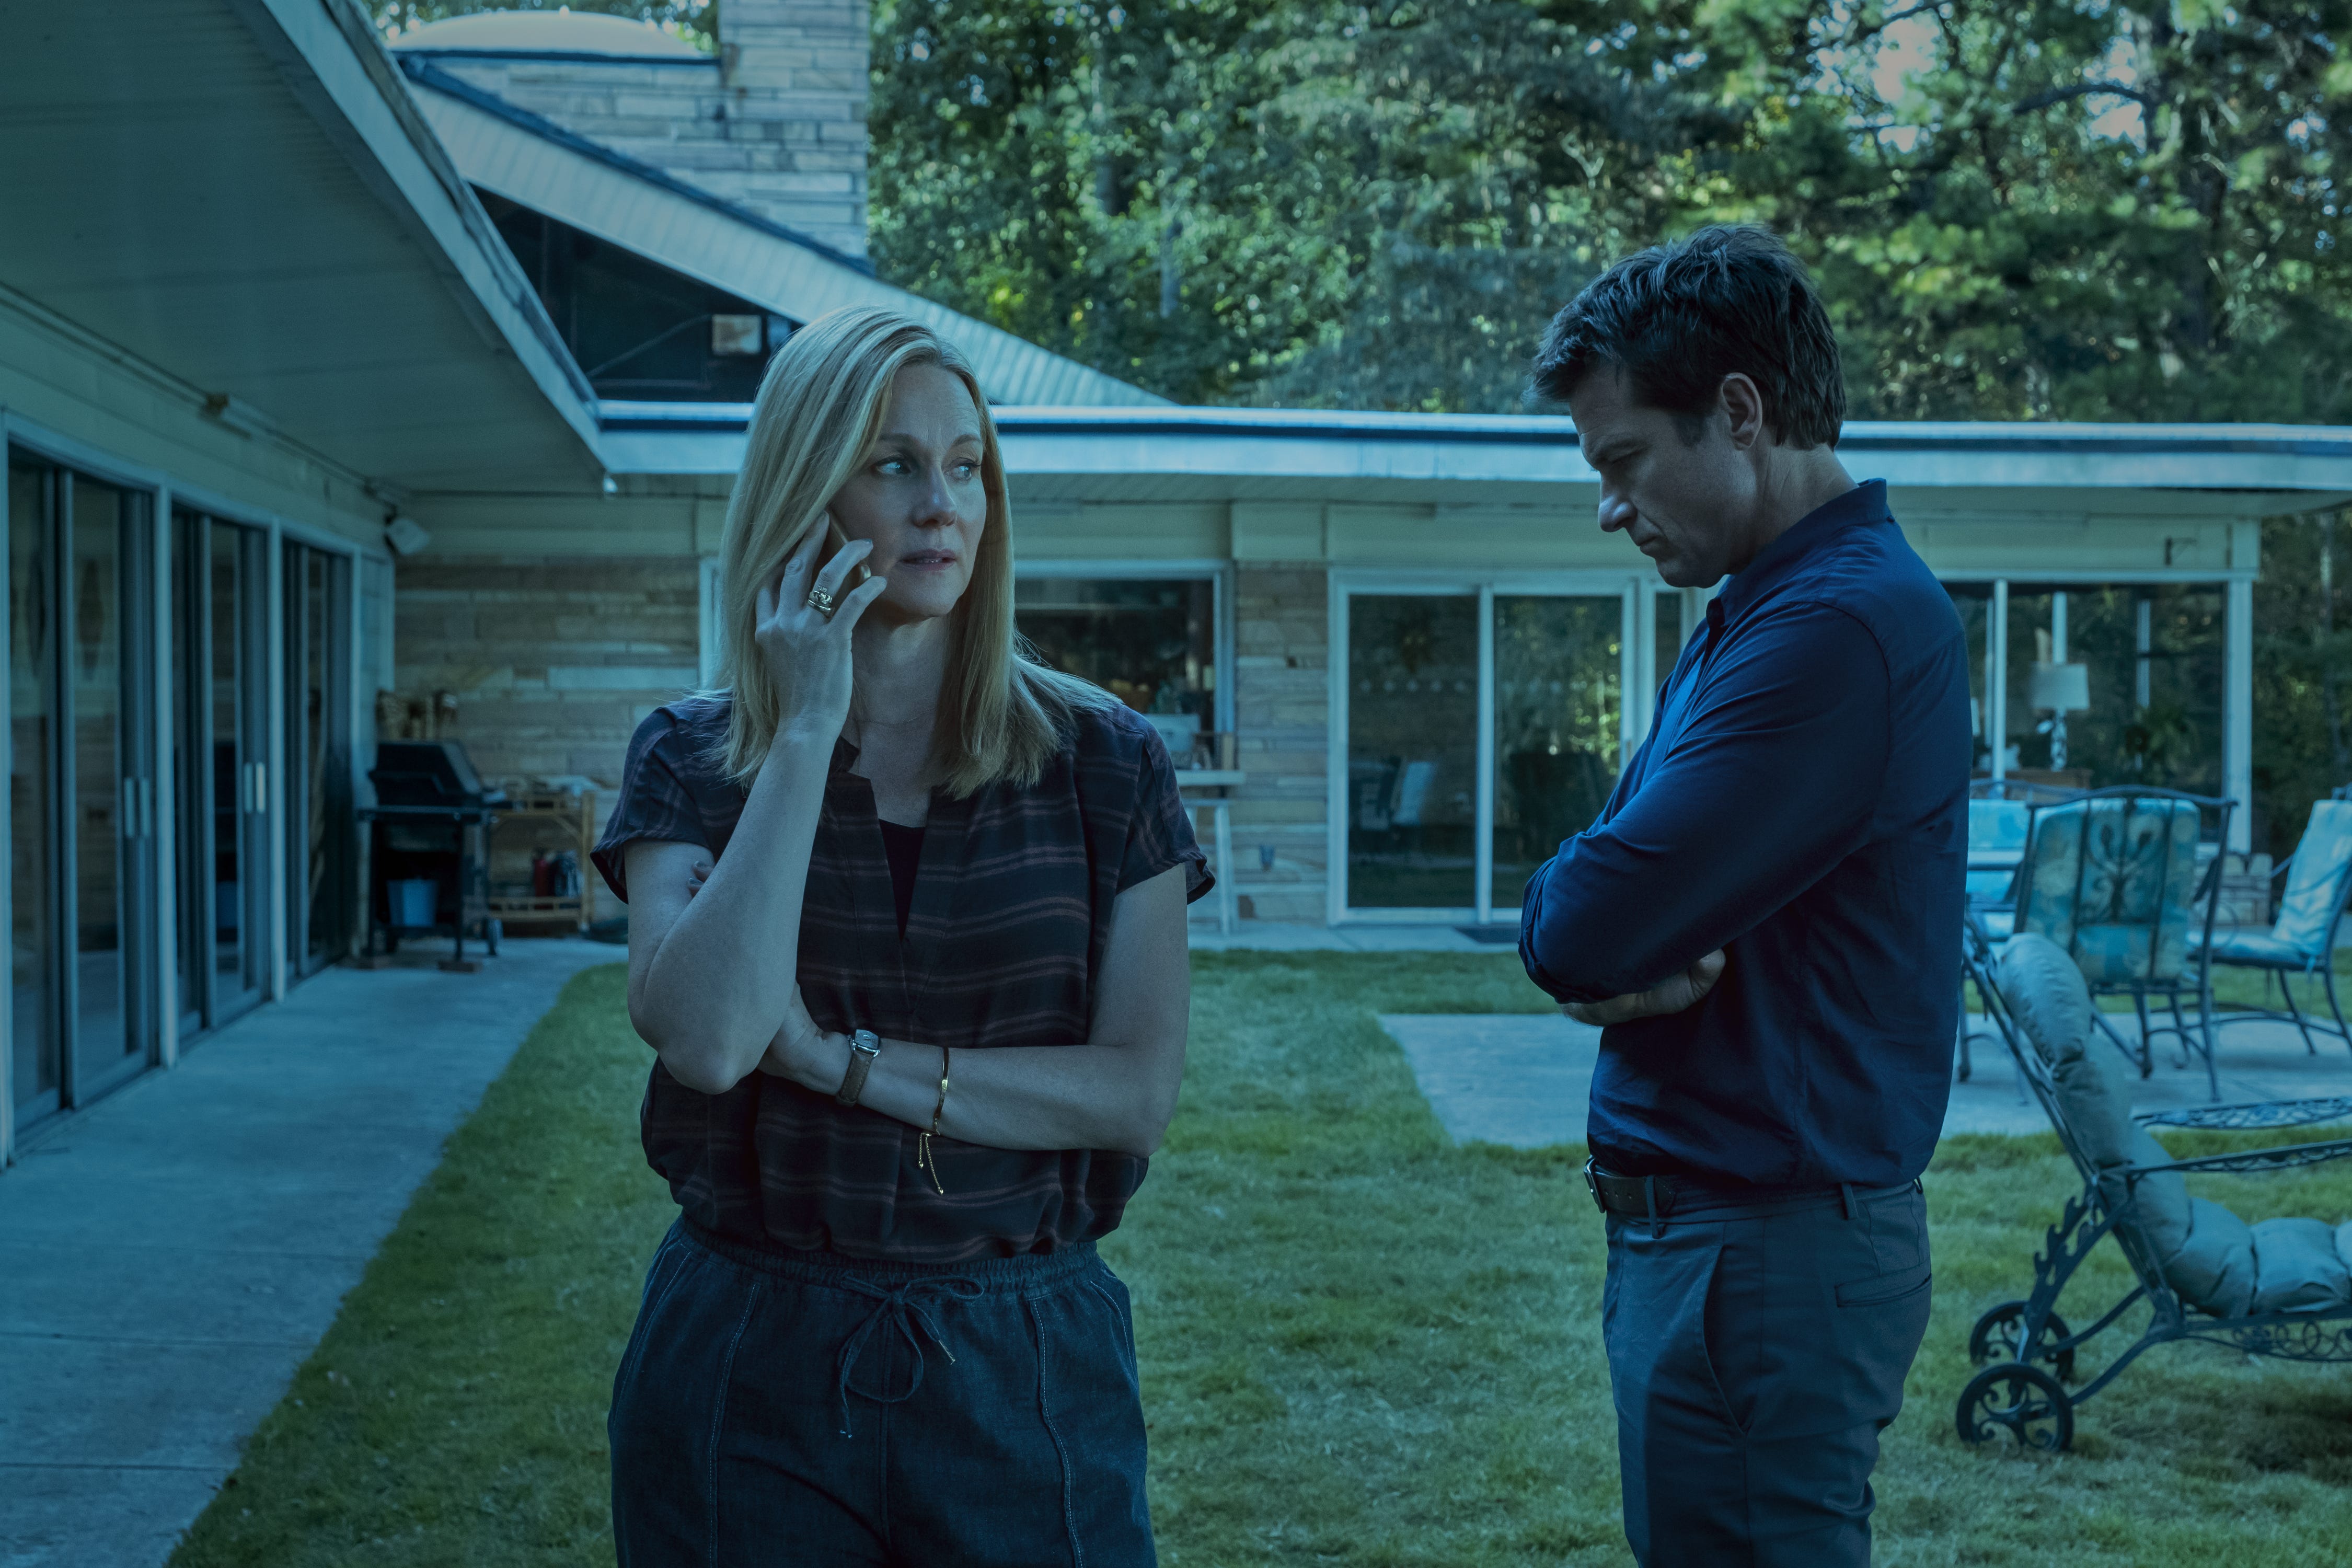 The latest season of 'Ozark' has become one of the hot topics on social media during quarantining for the COVID-19 crisis.